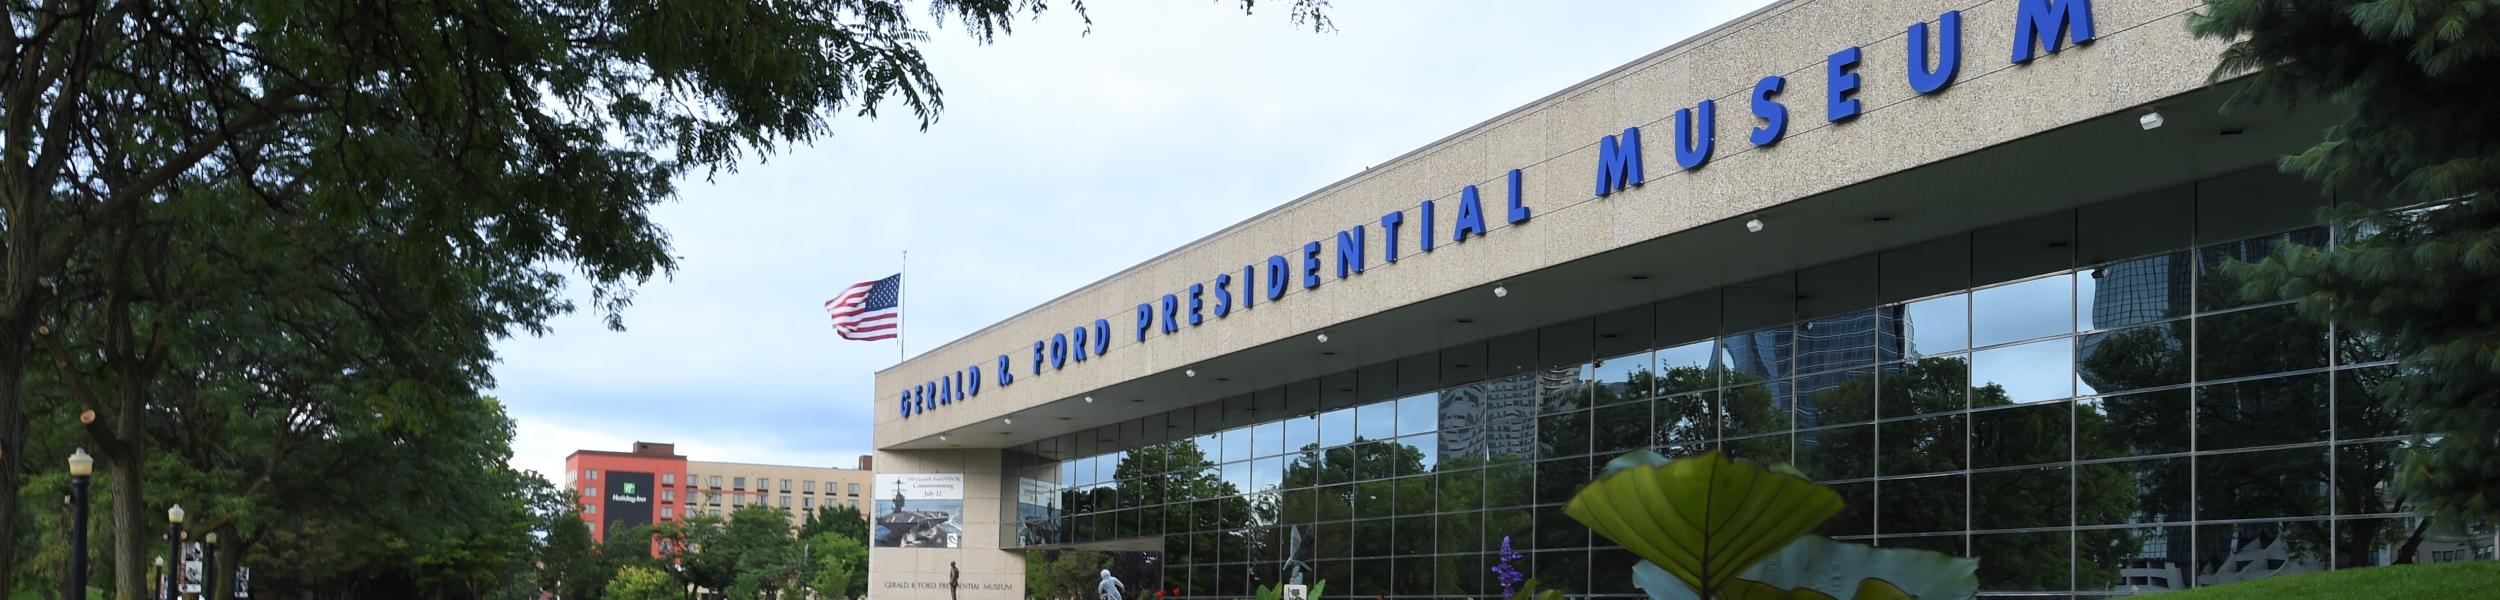 The exterior of the museum showcases gardens filled with colorful flowers, green lawns and the building has large blue block letters reading "Gerald R Ford Presidential Museum"